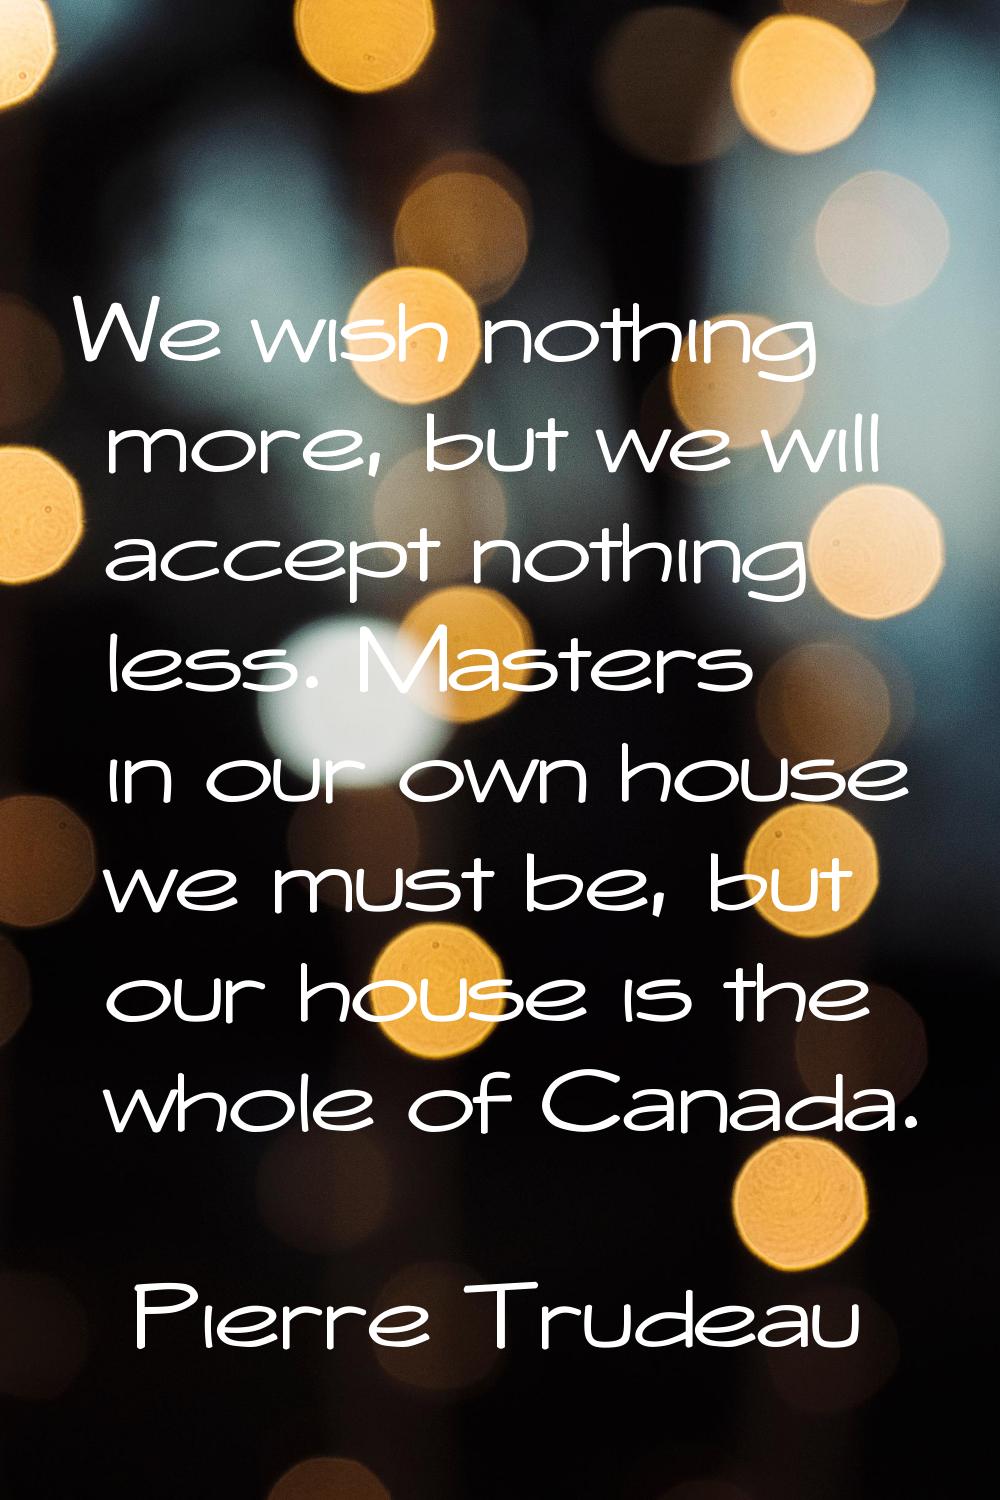 We wish nothing more, but we will accept nothing less. Masters in our own house we must be, but our